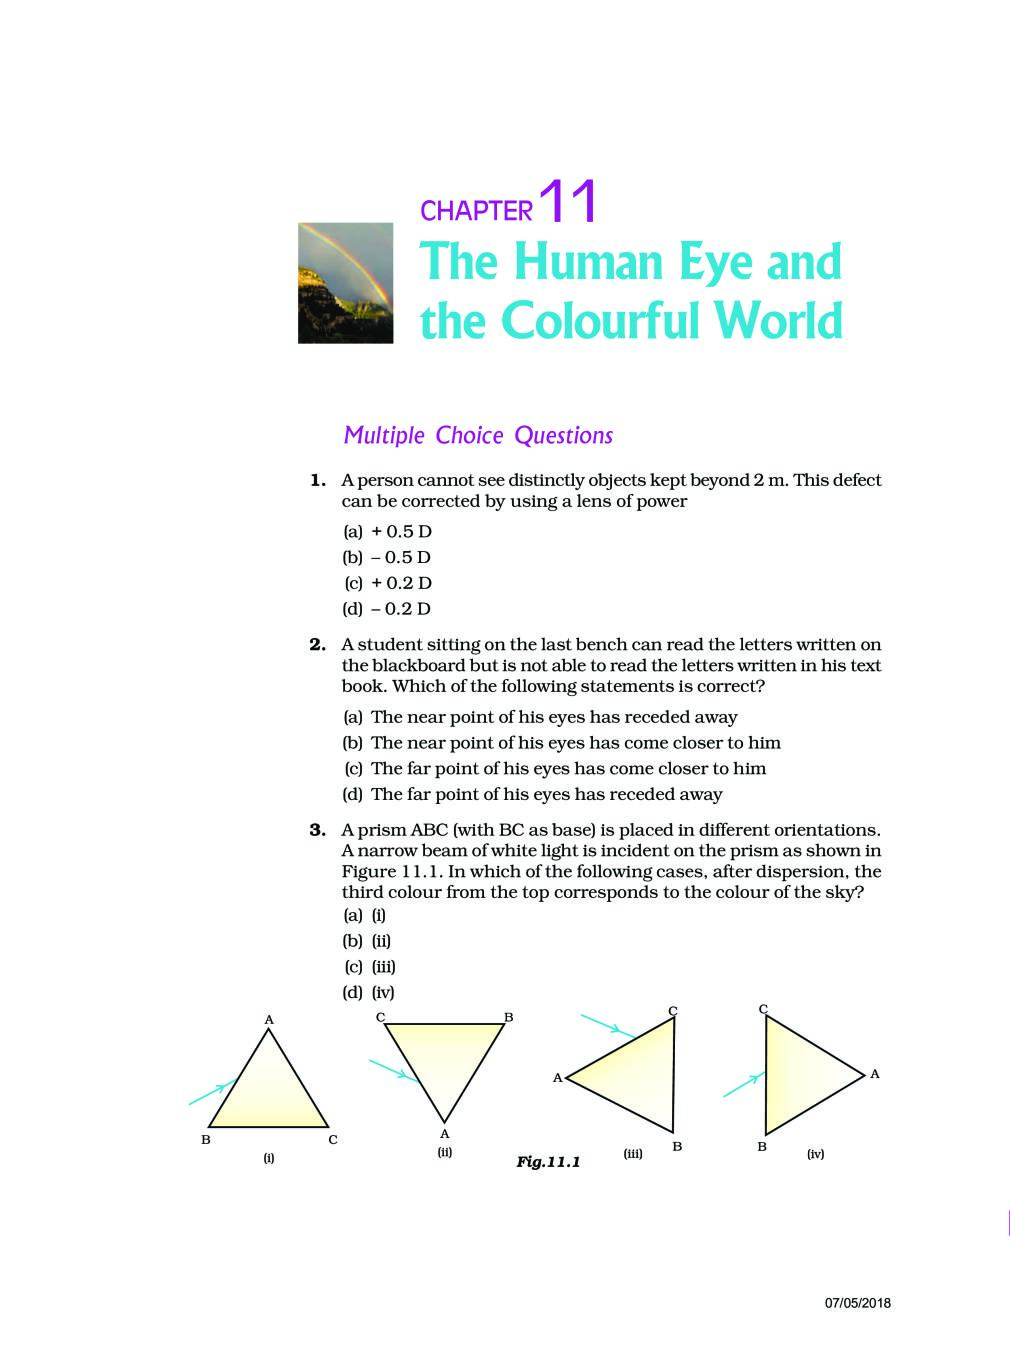 NCERT Exemplar Class 10 Science Unit 11 The Human Eye and the Colourful World - Page 1